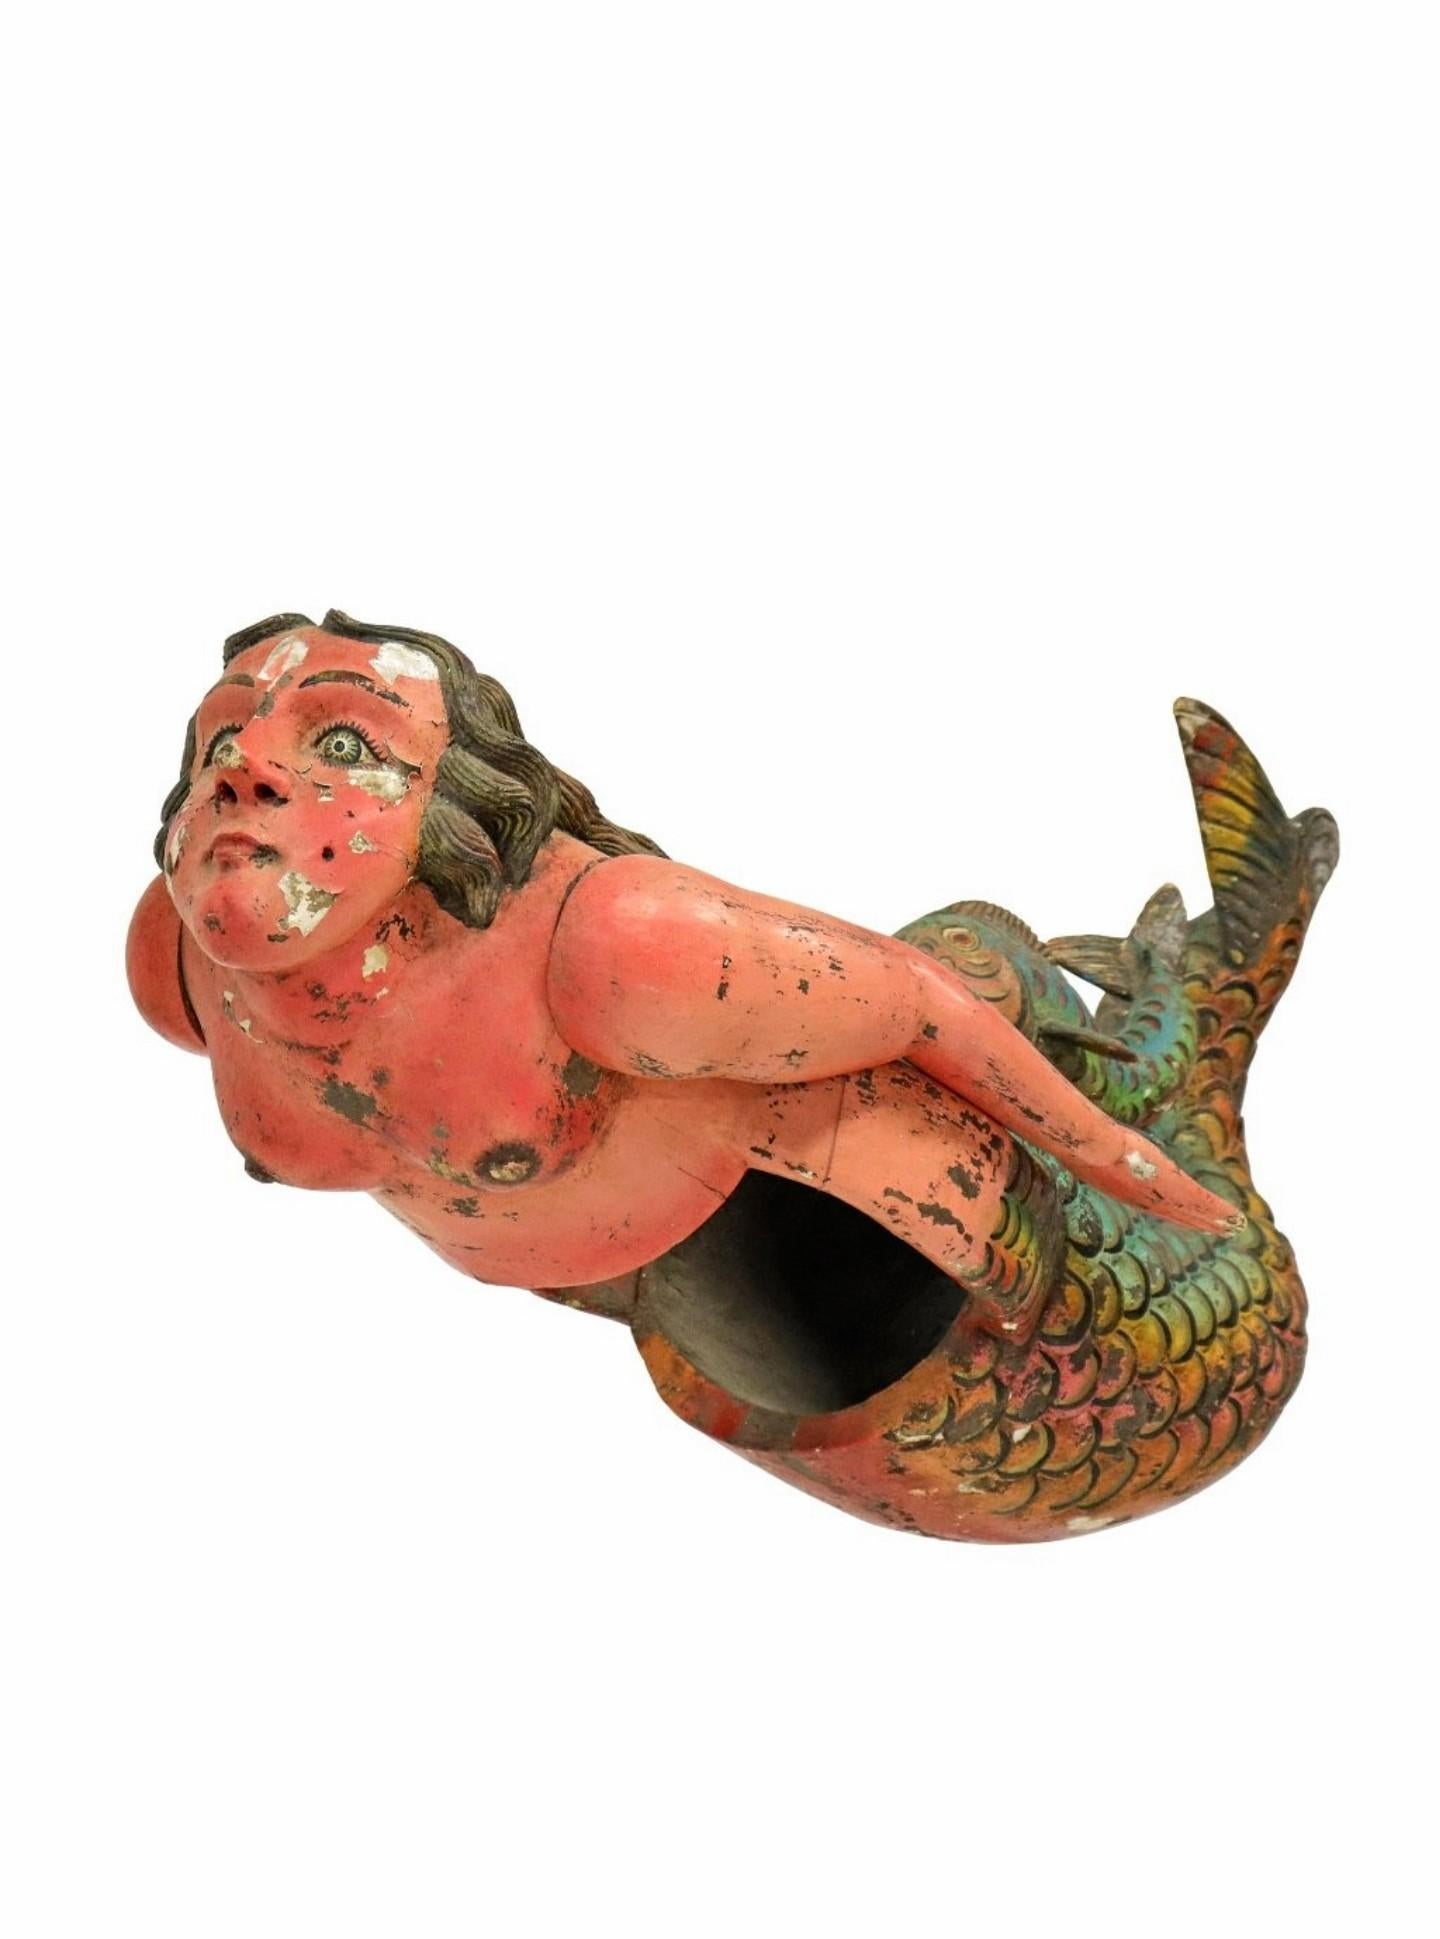 A magnificent life-size Mexican folk art hand carved and painted wood body dance mask, in the form of a mermaid, dating to the early 20th century, most likely originating in Guerrero, Mexico.

Featuring a large nude female form, exquisitely detailed